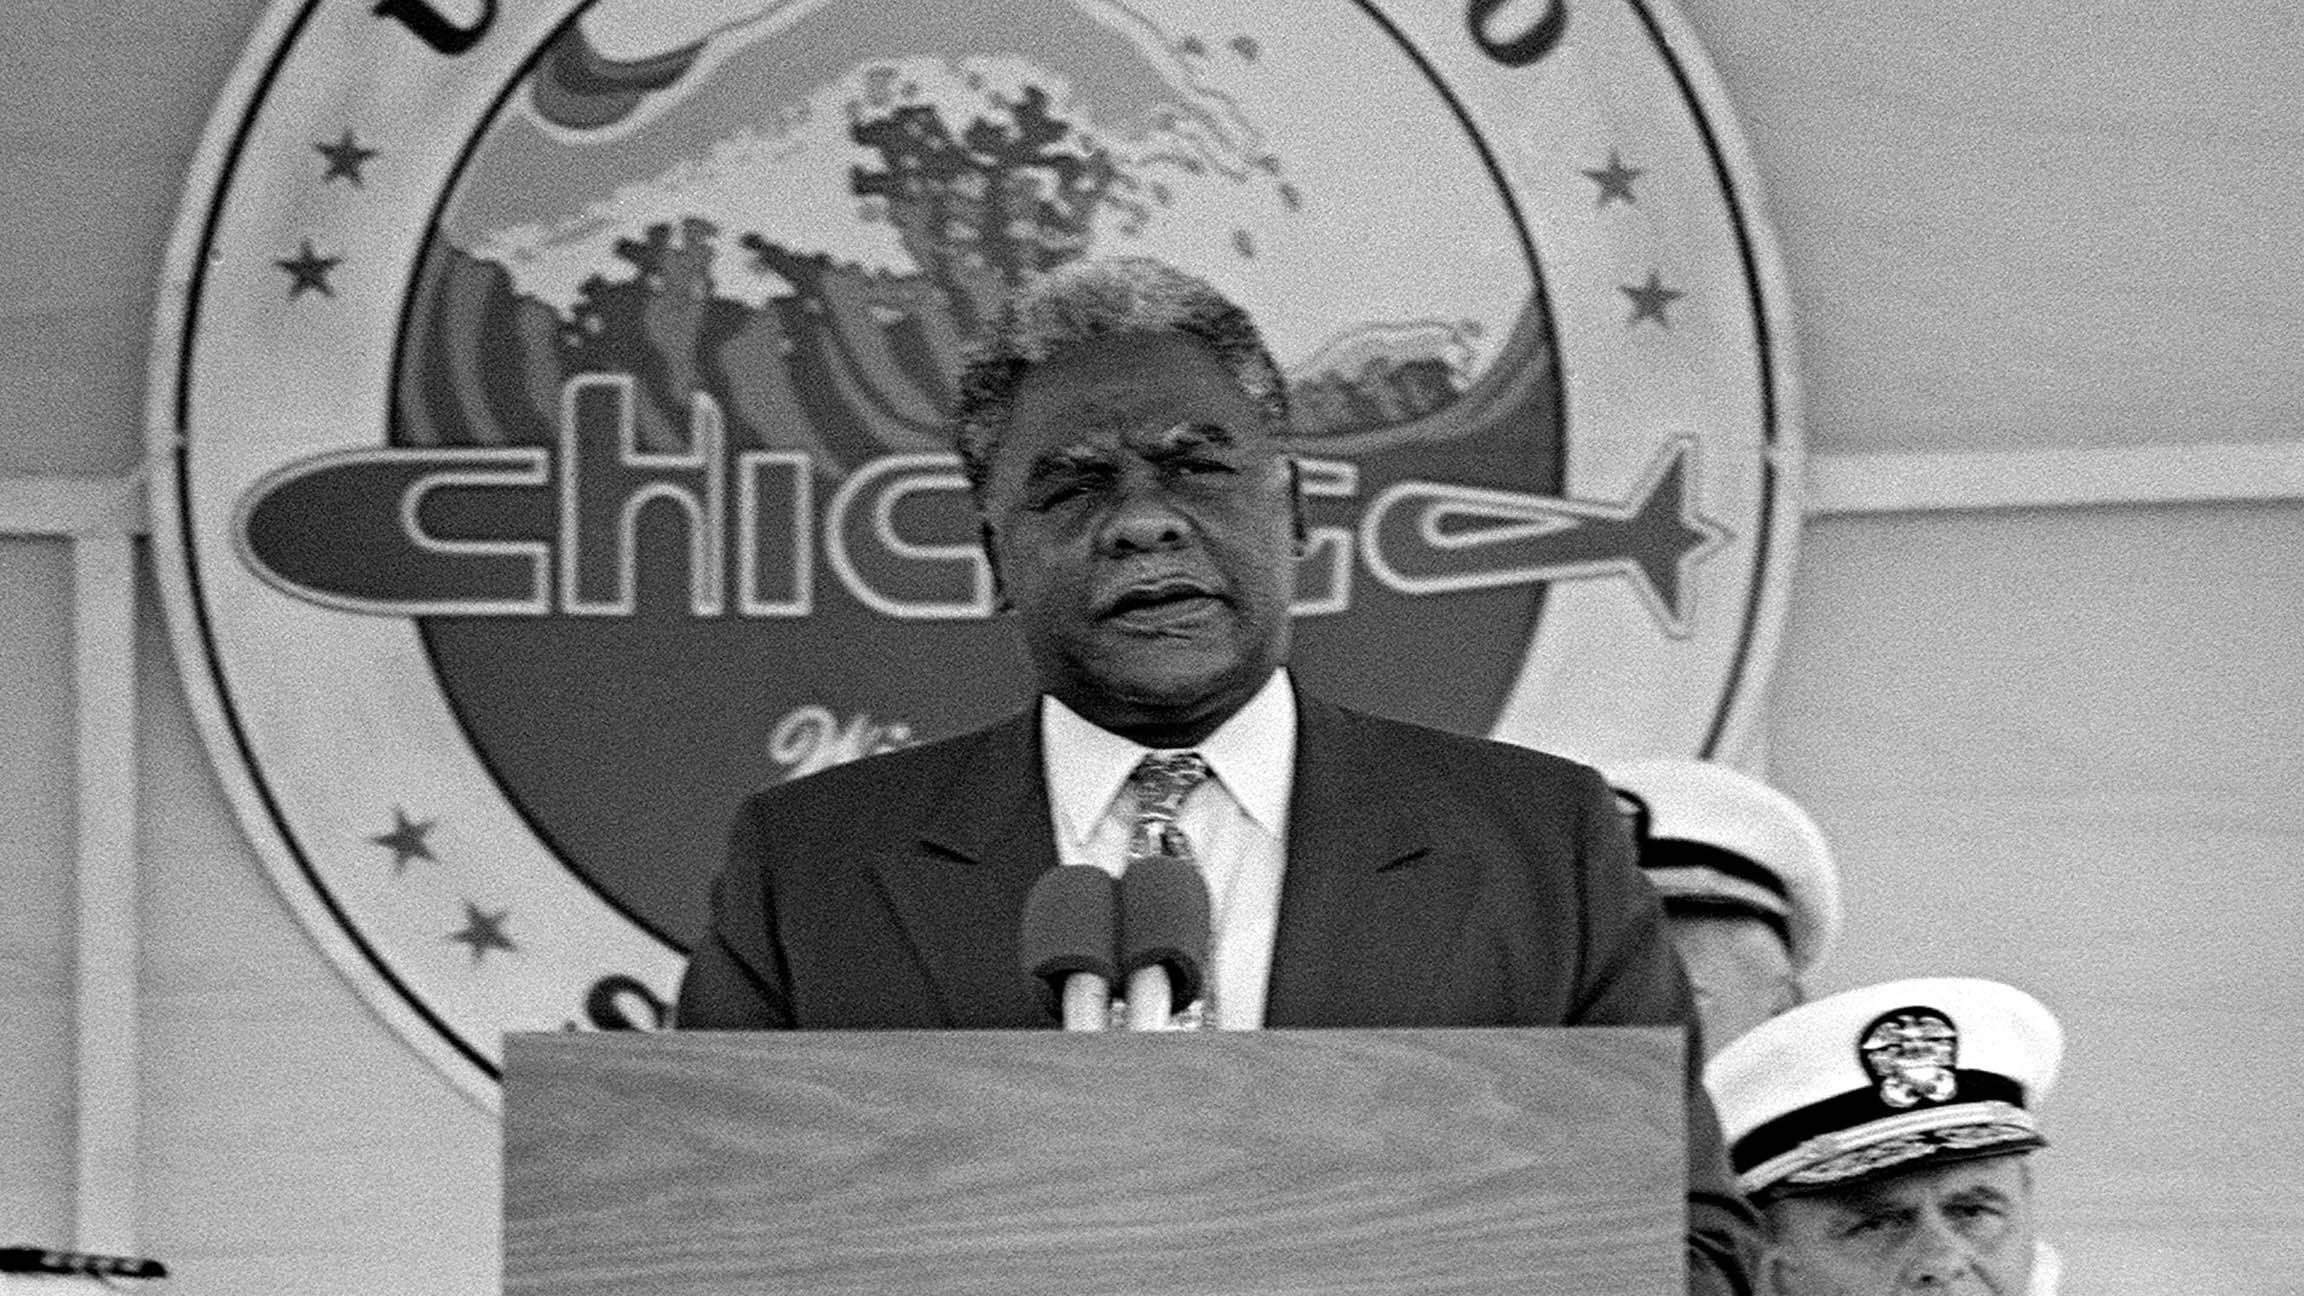 Chicago Mayor Harold Washington speaks during the commissioning of the nuclear-powered attack submarine USS Chicago in September 1986 in Norfolk, Virginia. (The U.S. National Archives)